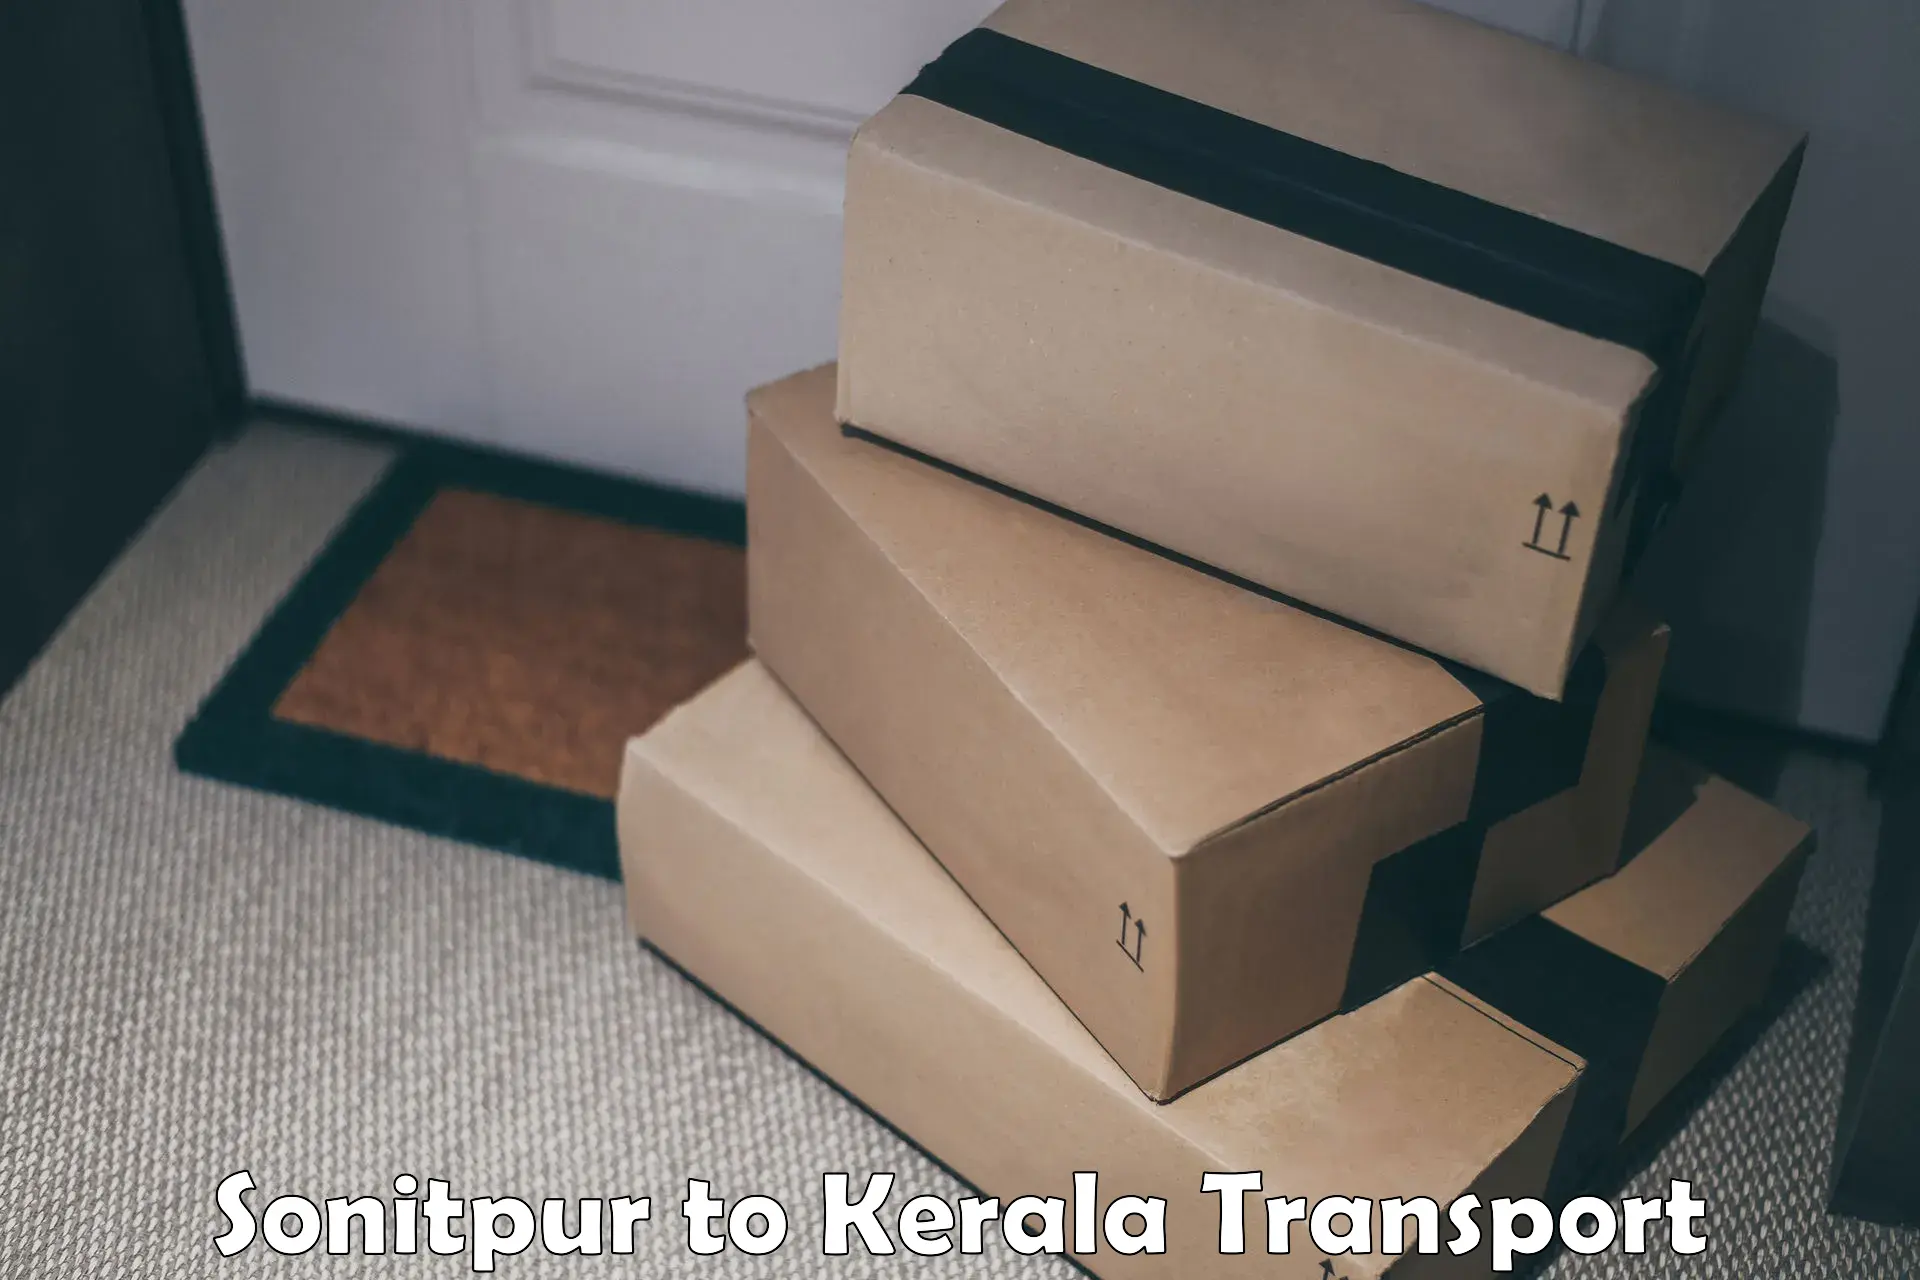 Two wheeler parcel service in Sonitpur to Kollam